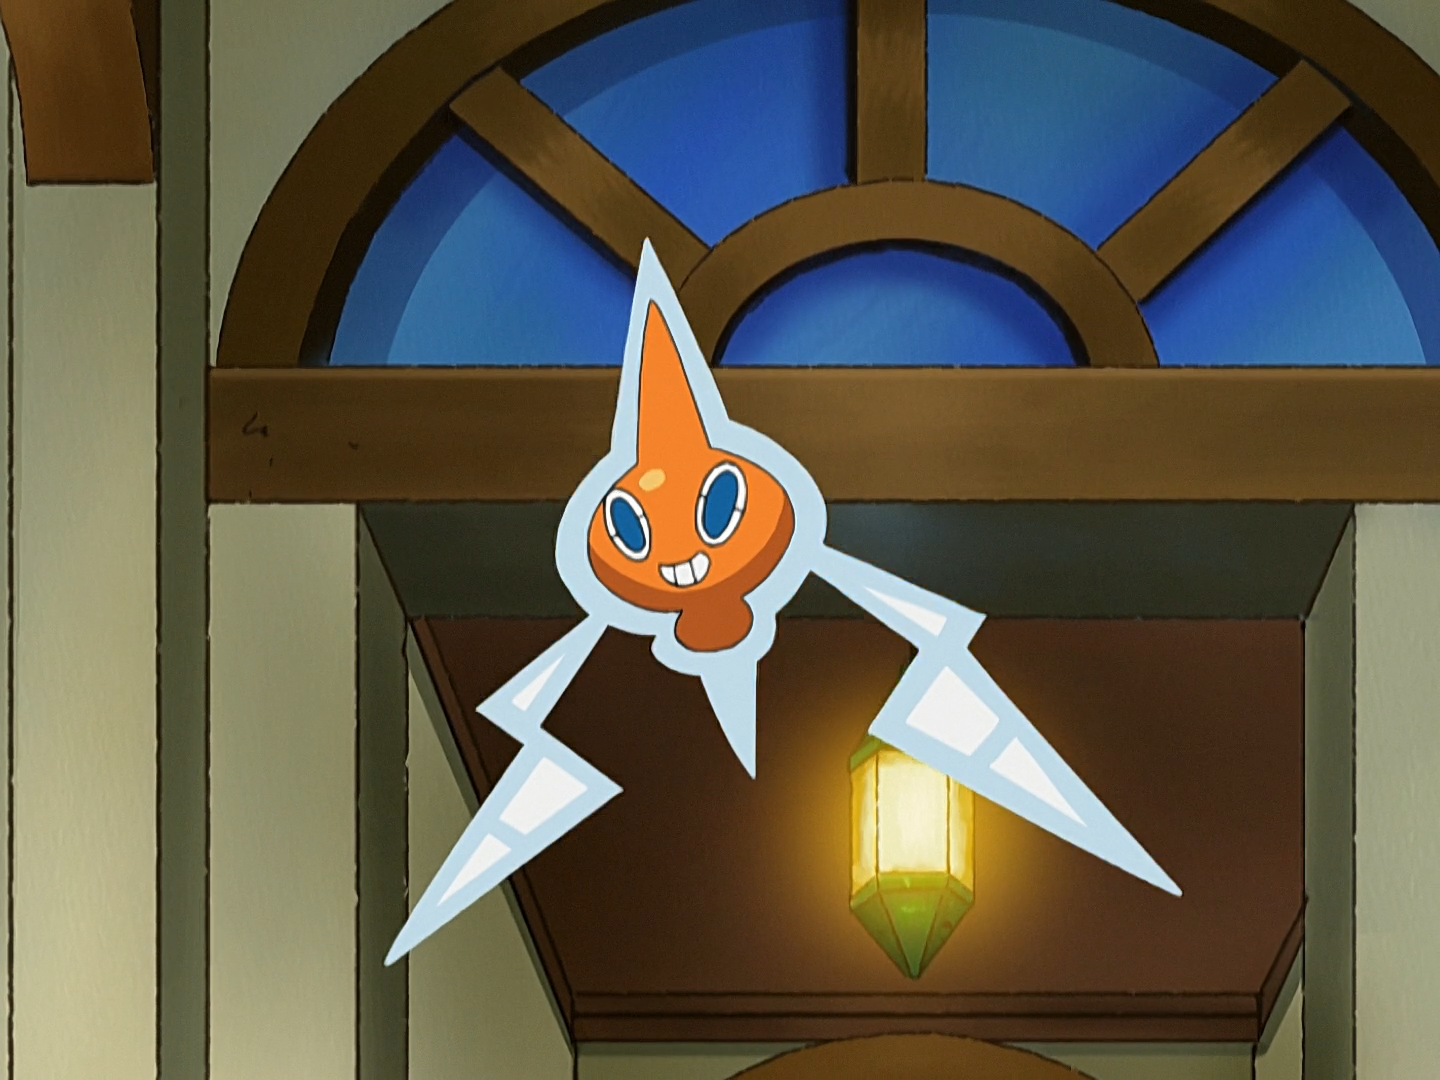 http://vignette4.wikia.nocookie.net/pokemon/images/7/79/Rotom_DP105.png/revision/